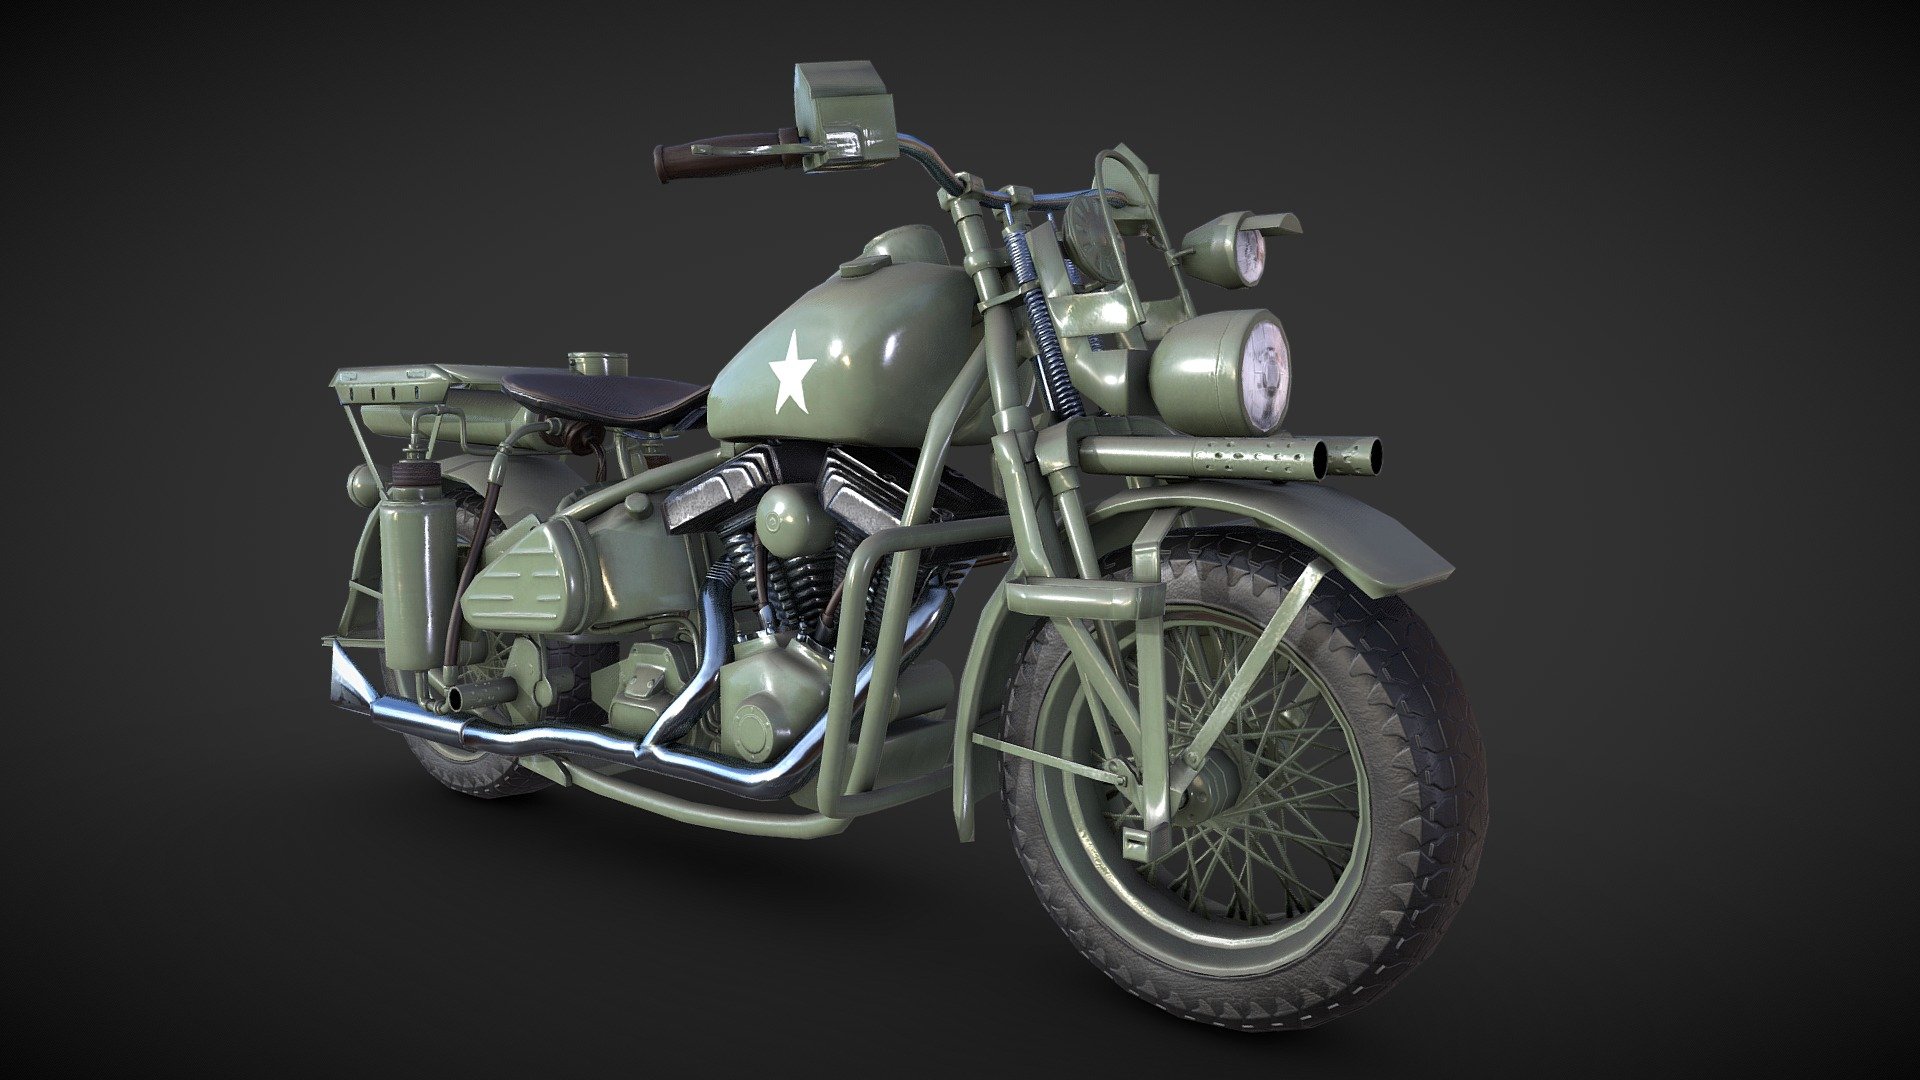 Captain America Bike was made by folowing the tutorial &gt; Blender - Hard Surface Modeling.
This is Low Poly Version, 3x materials, in 4k
A gift to you 3d model